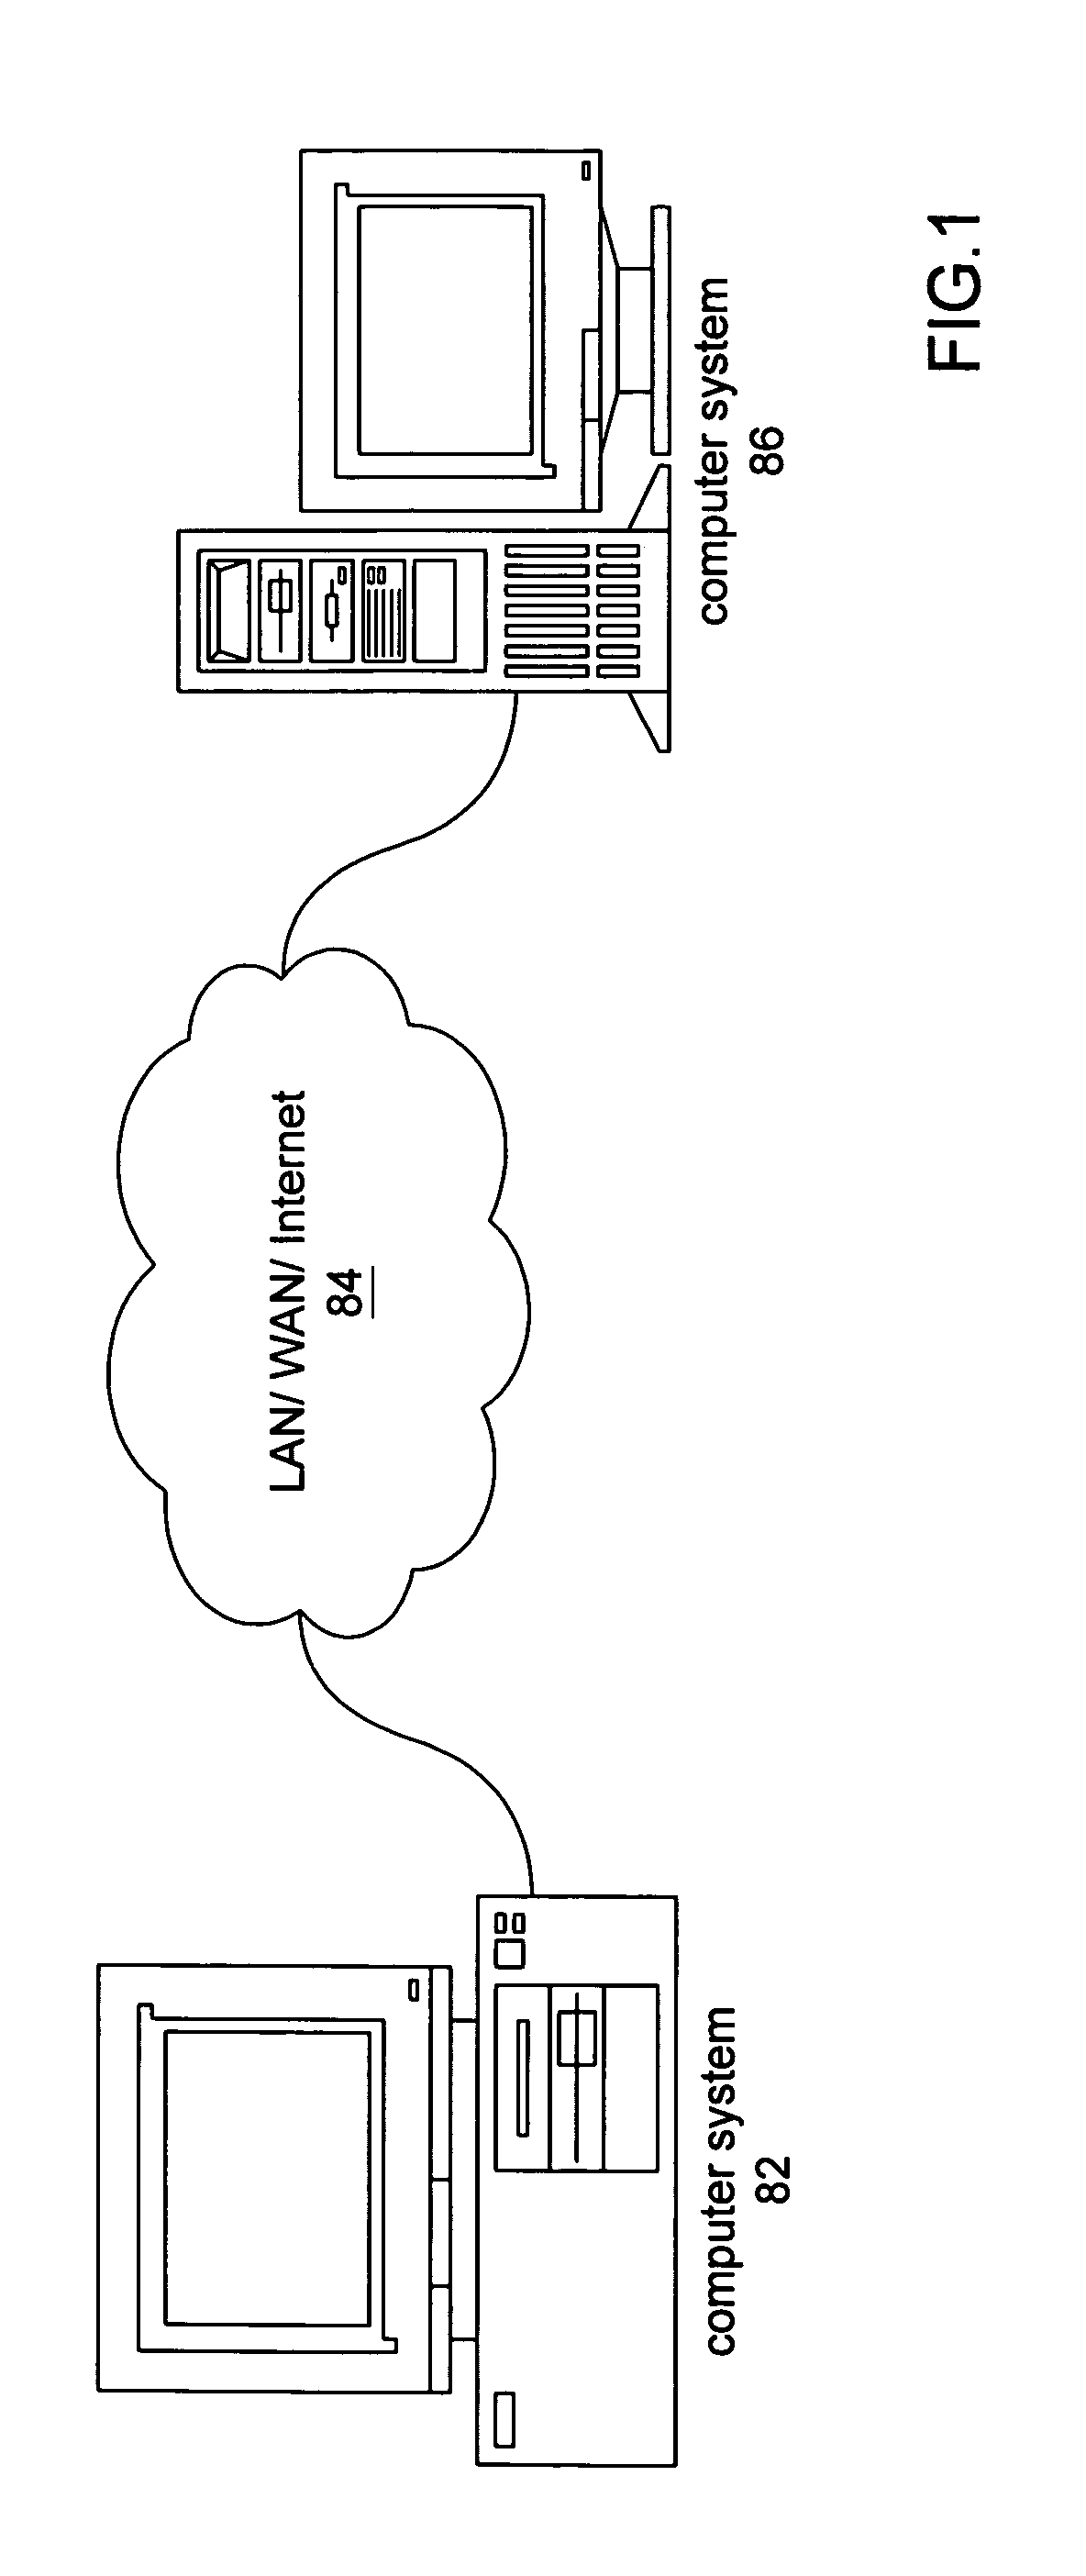 System and method for programmatically generating a graphical program in response to program information